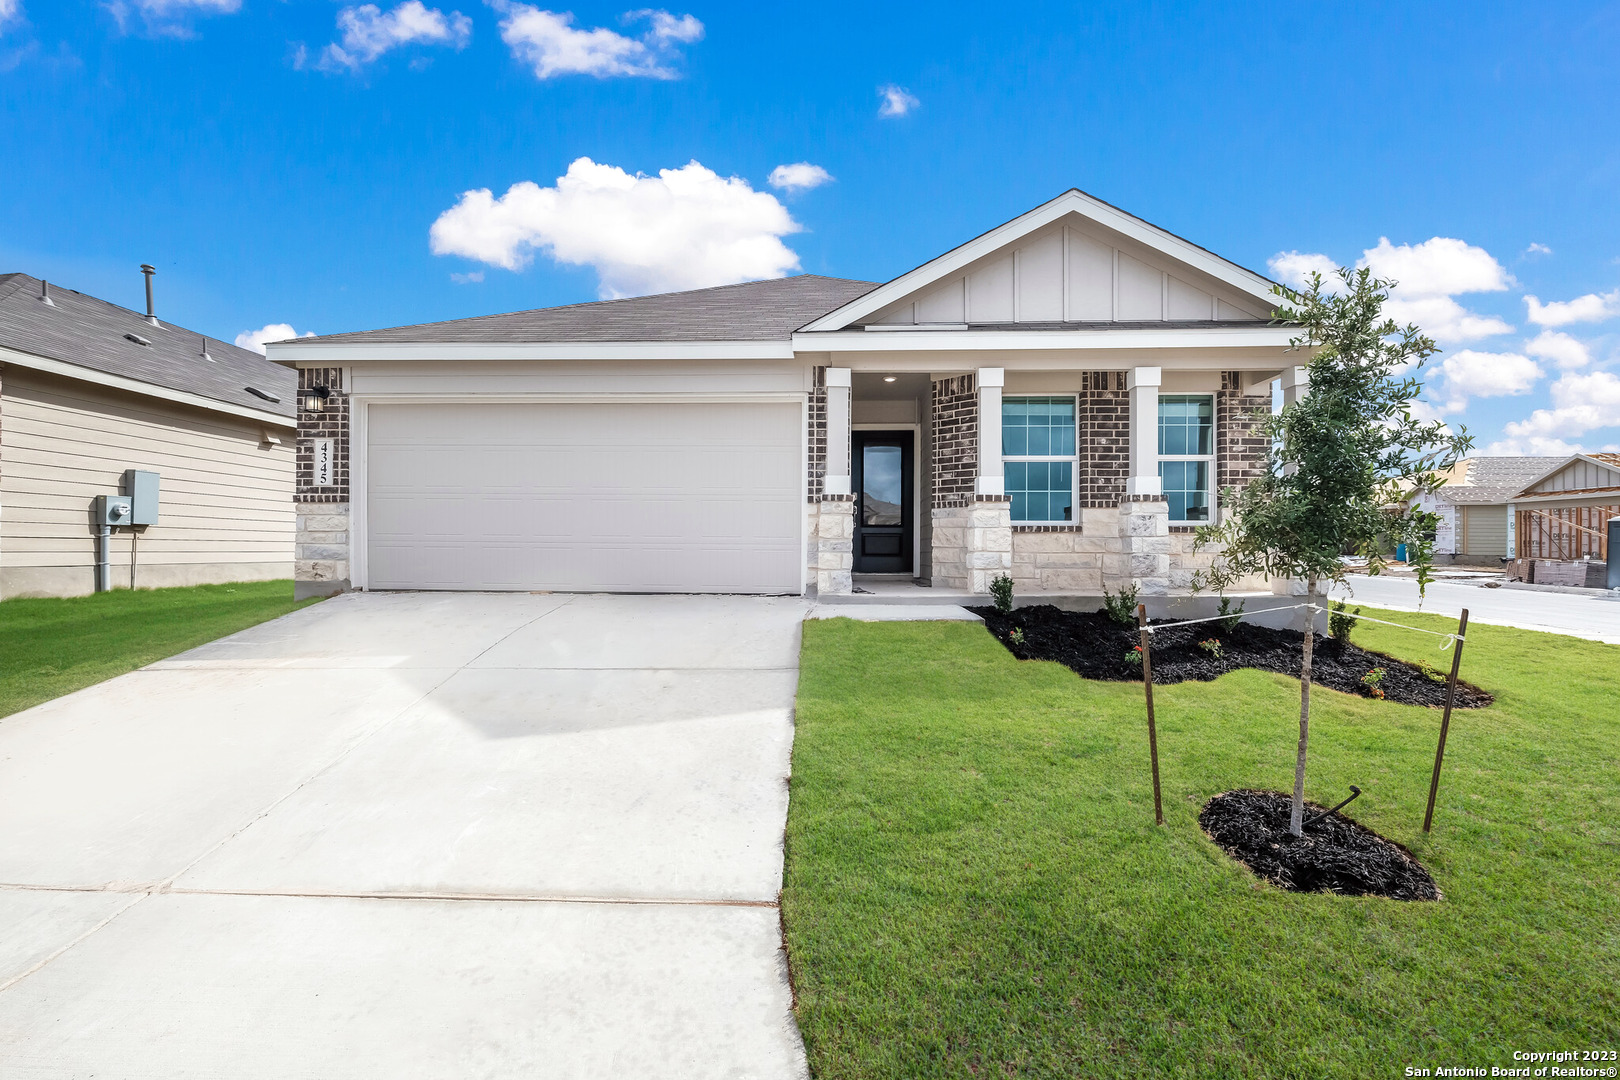 Photo of 3572 Axis Hill St in New Braunfels, TX